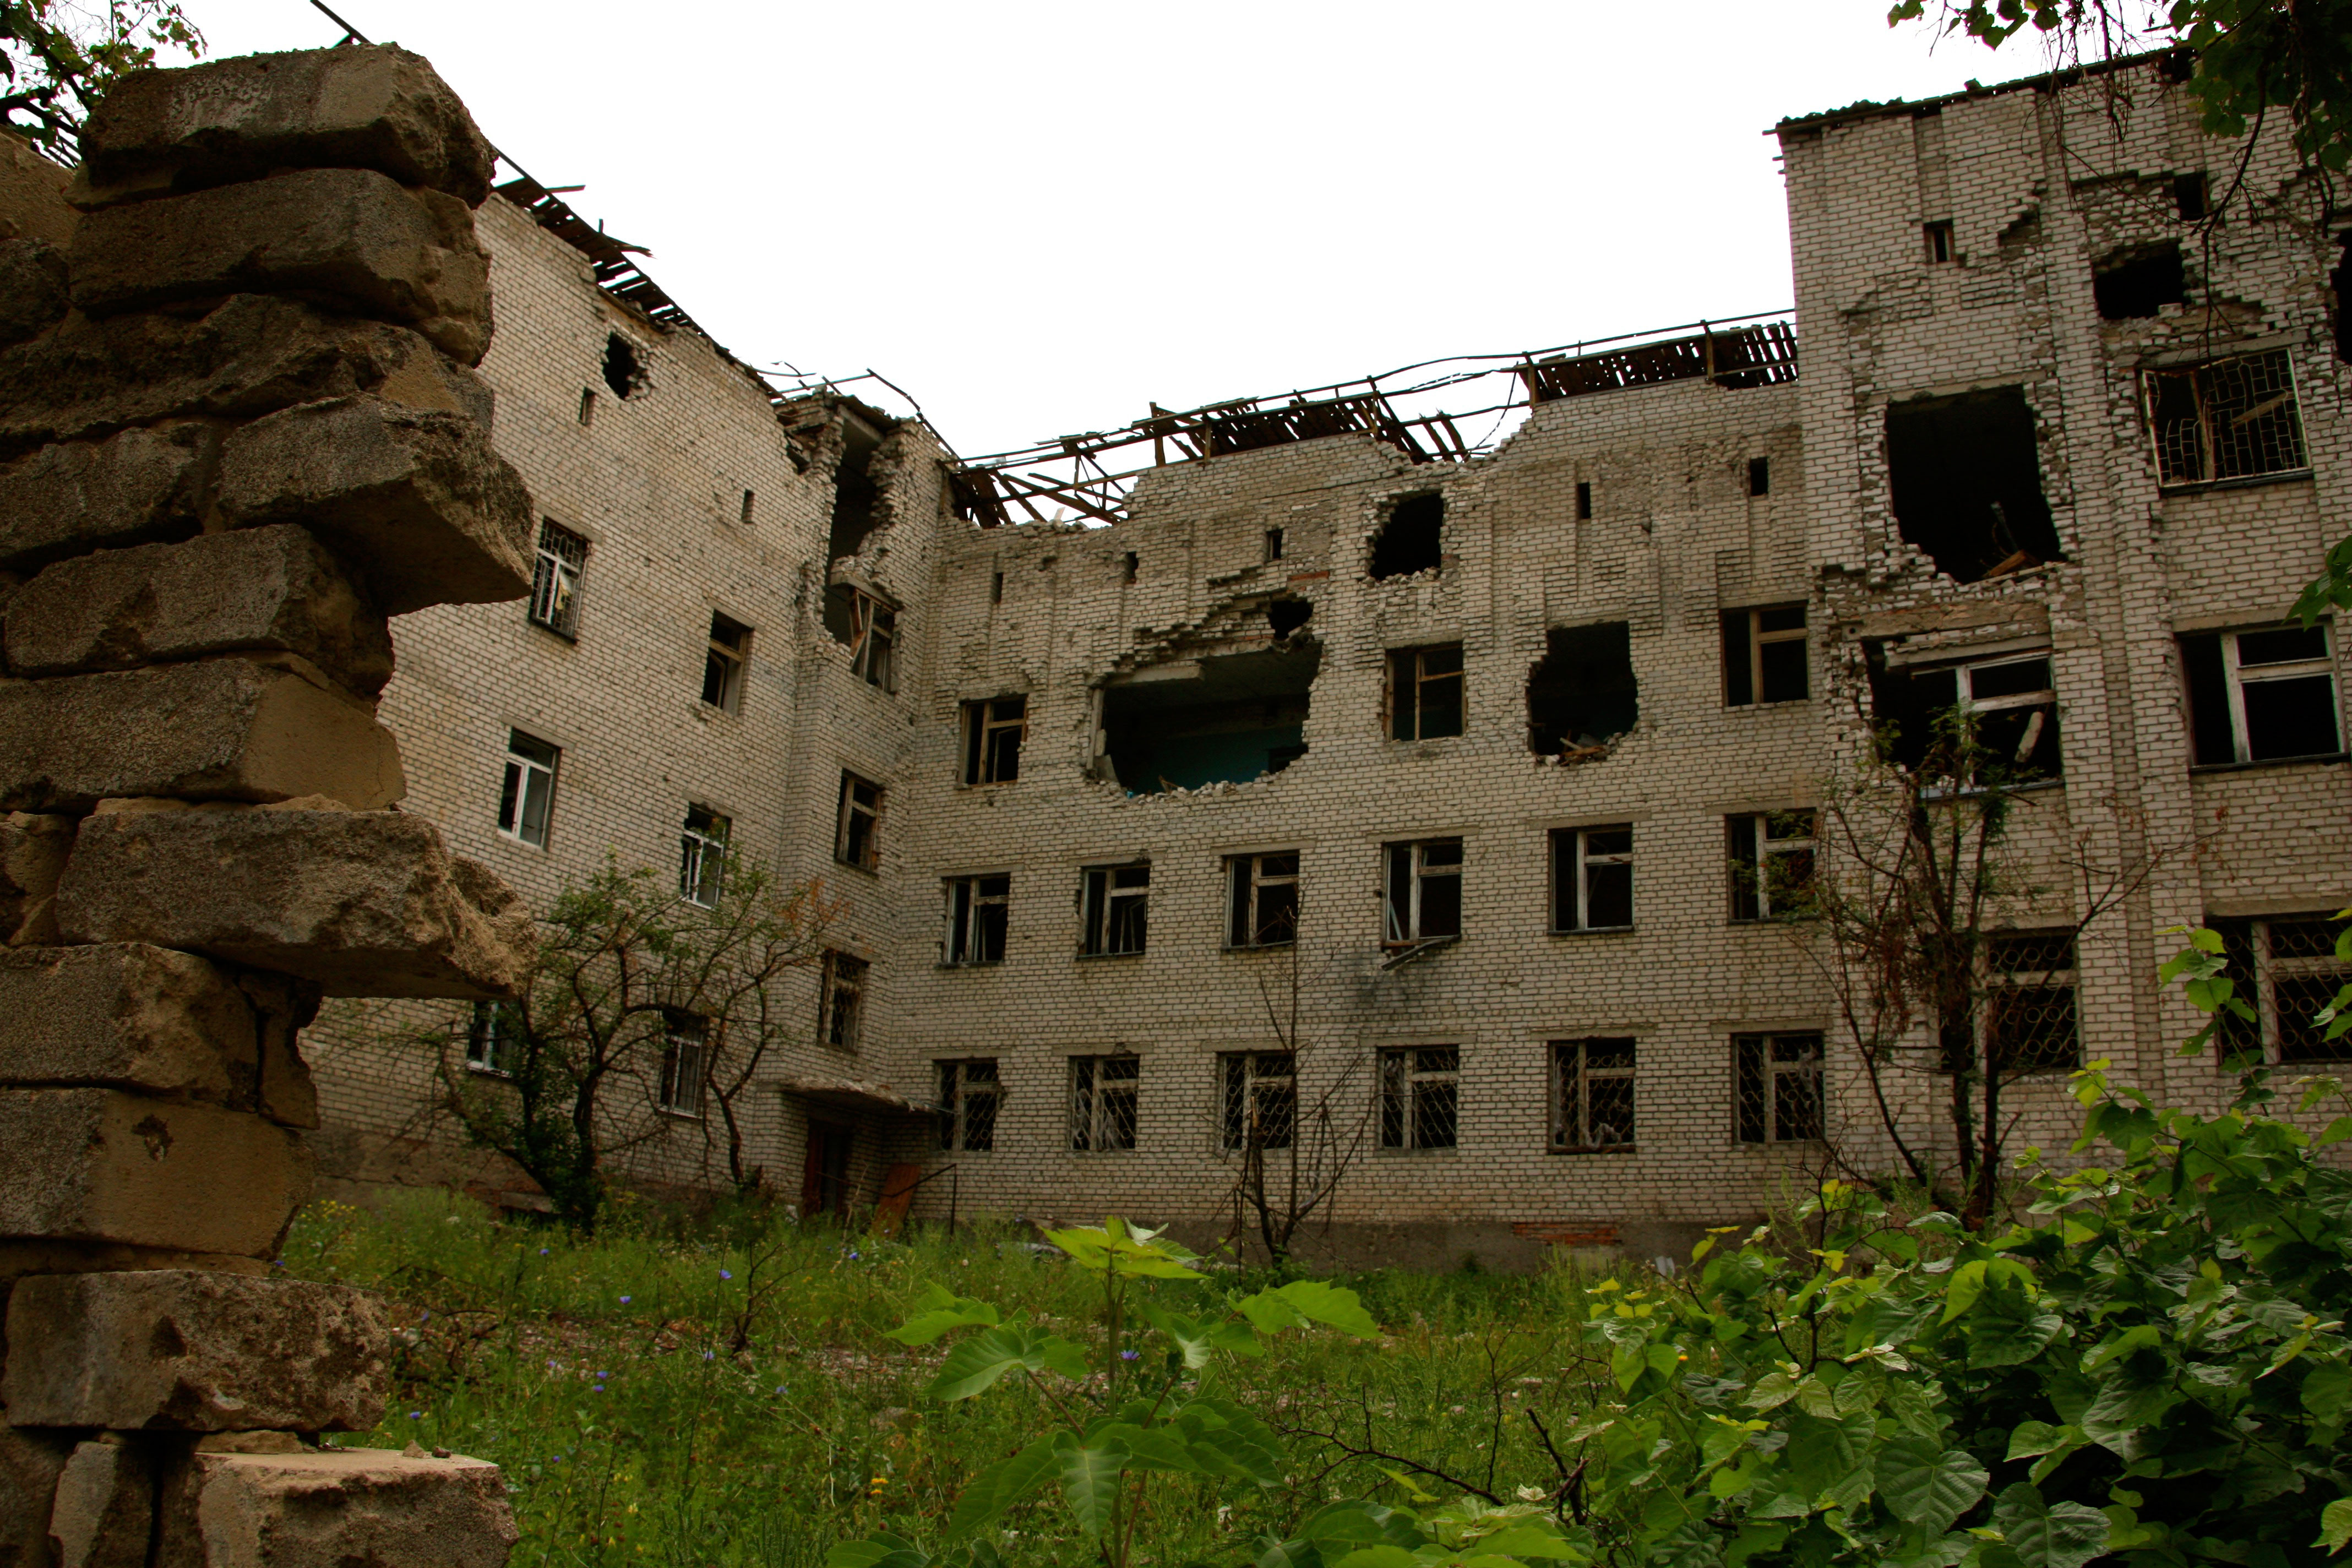 After more than two years of war, many villages in eastern Ukraine have been scarred by battle.